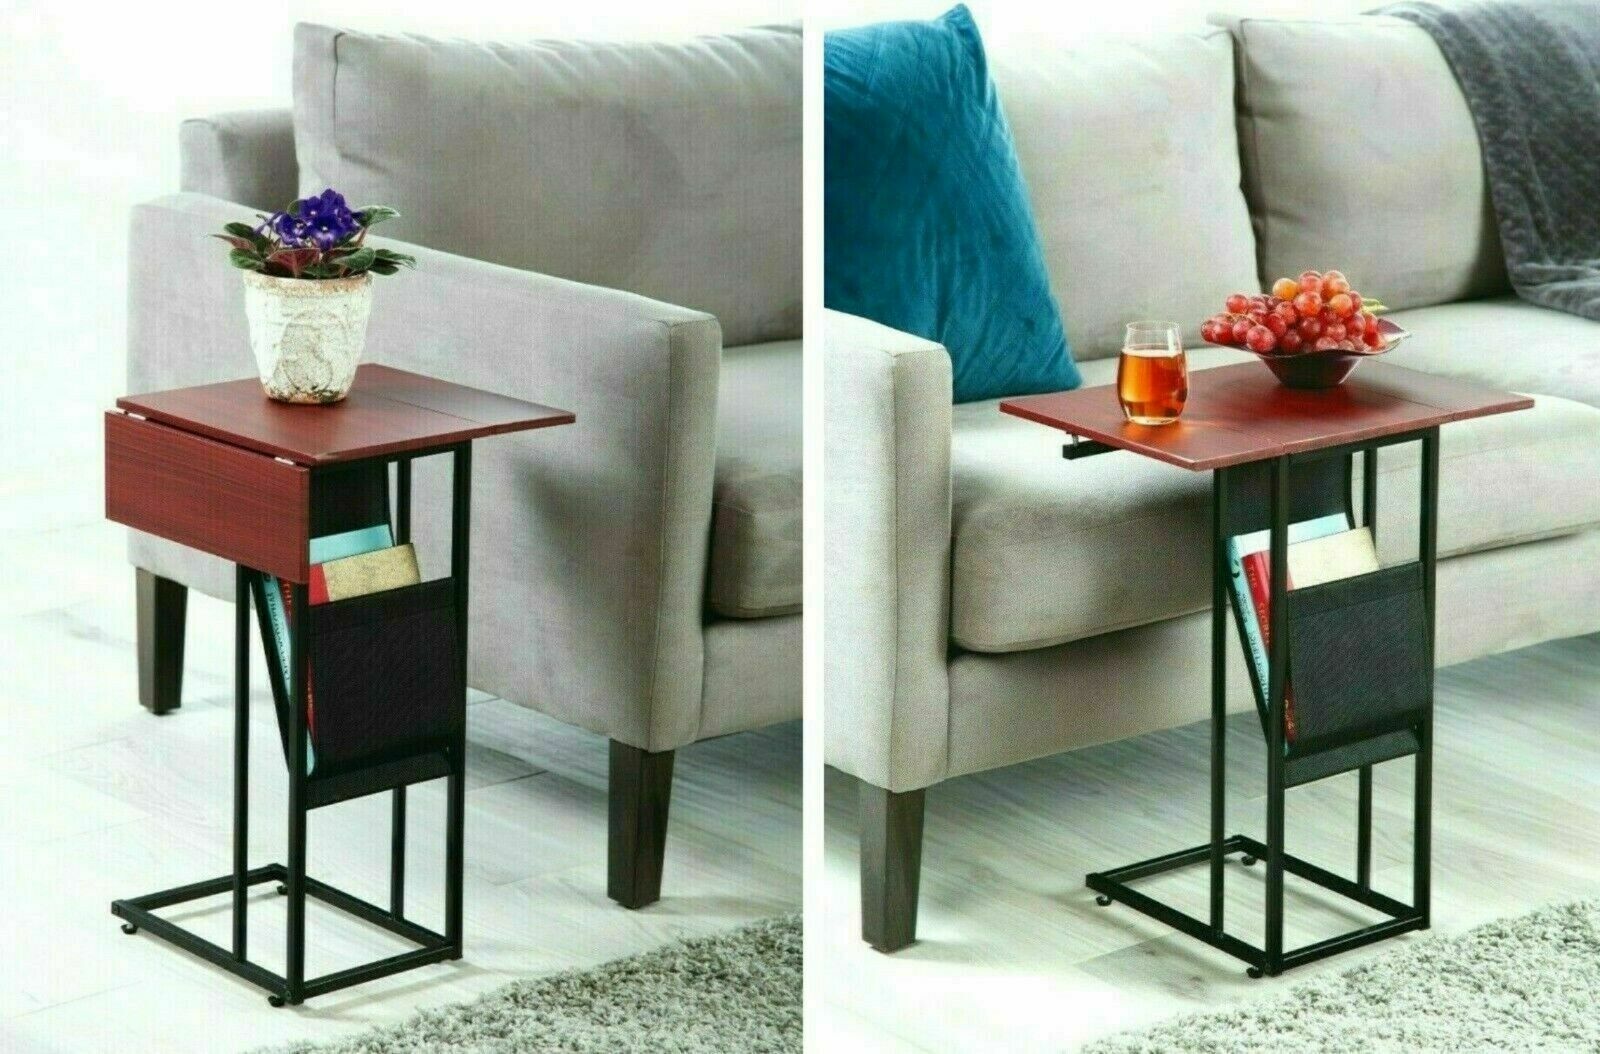 Sofa Side End Table Living Room, Couch Table with Side Pocket, C Shaped Table - Trays-Expandable, for Coffee Snack Laptop - image 1 of 3